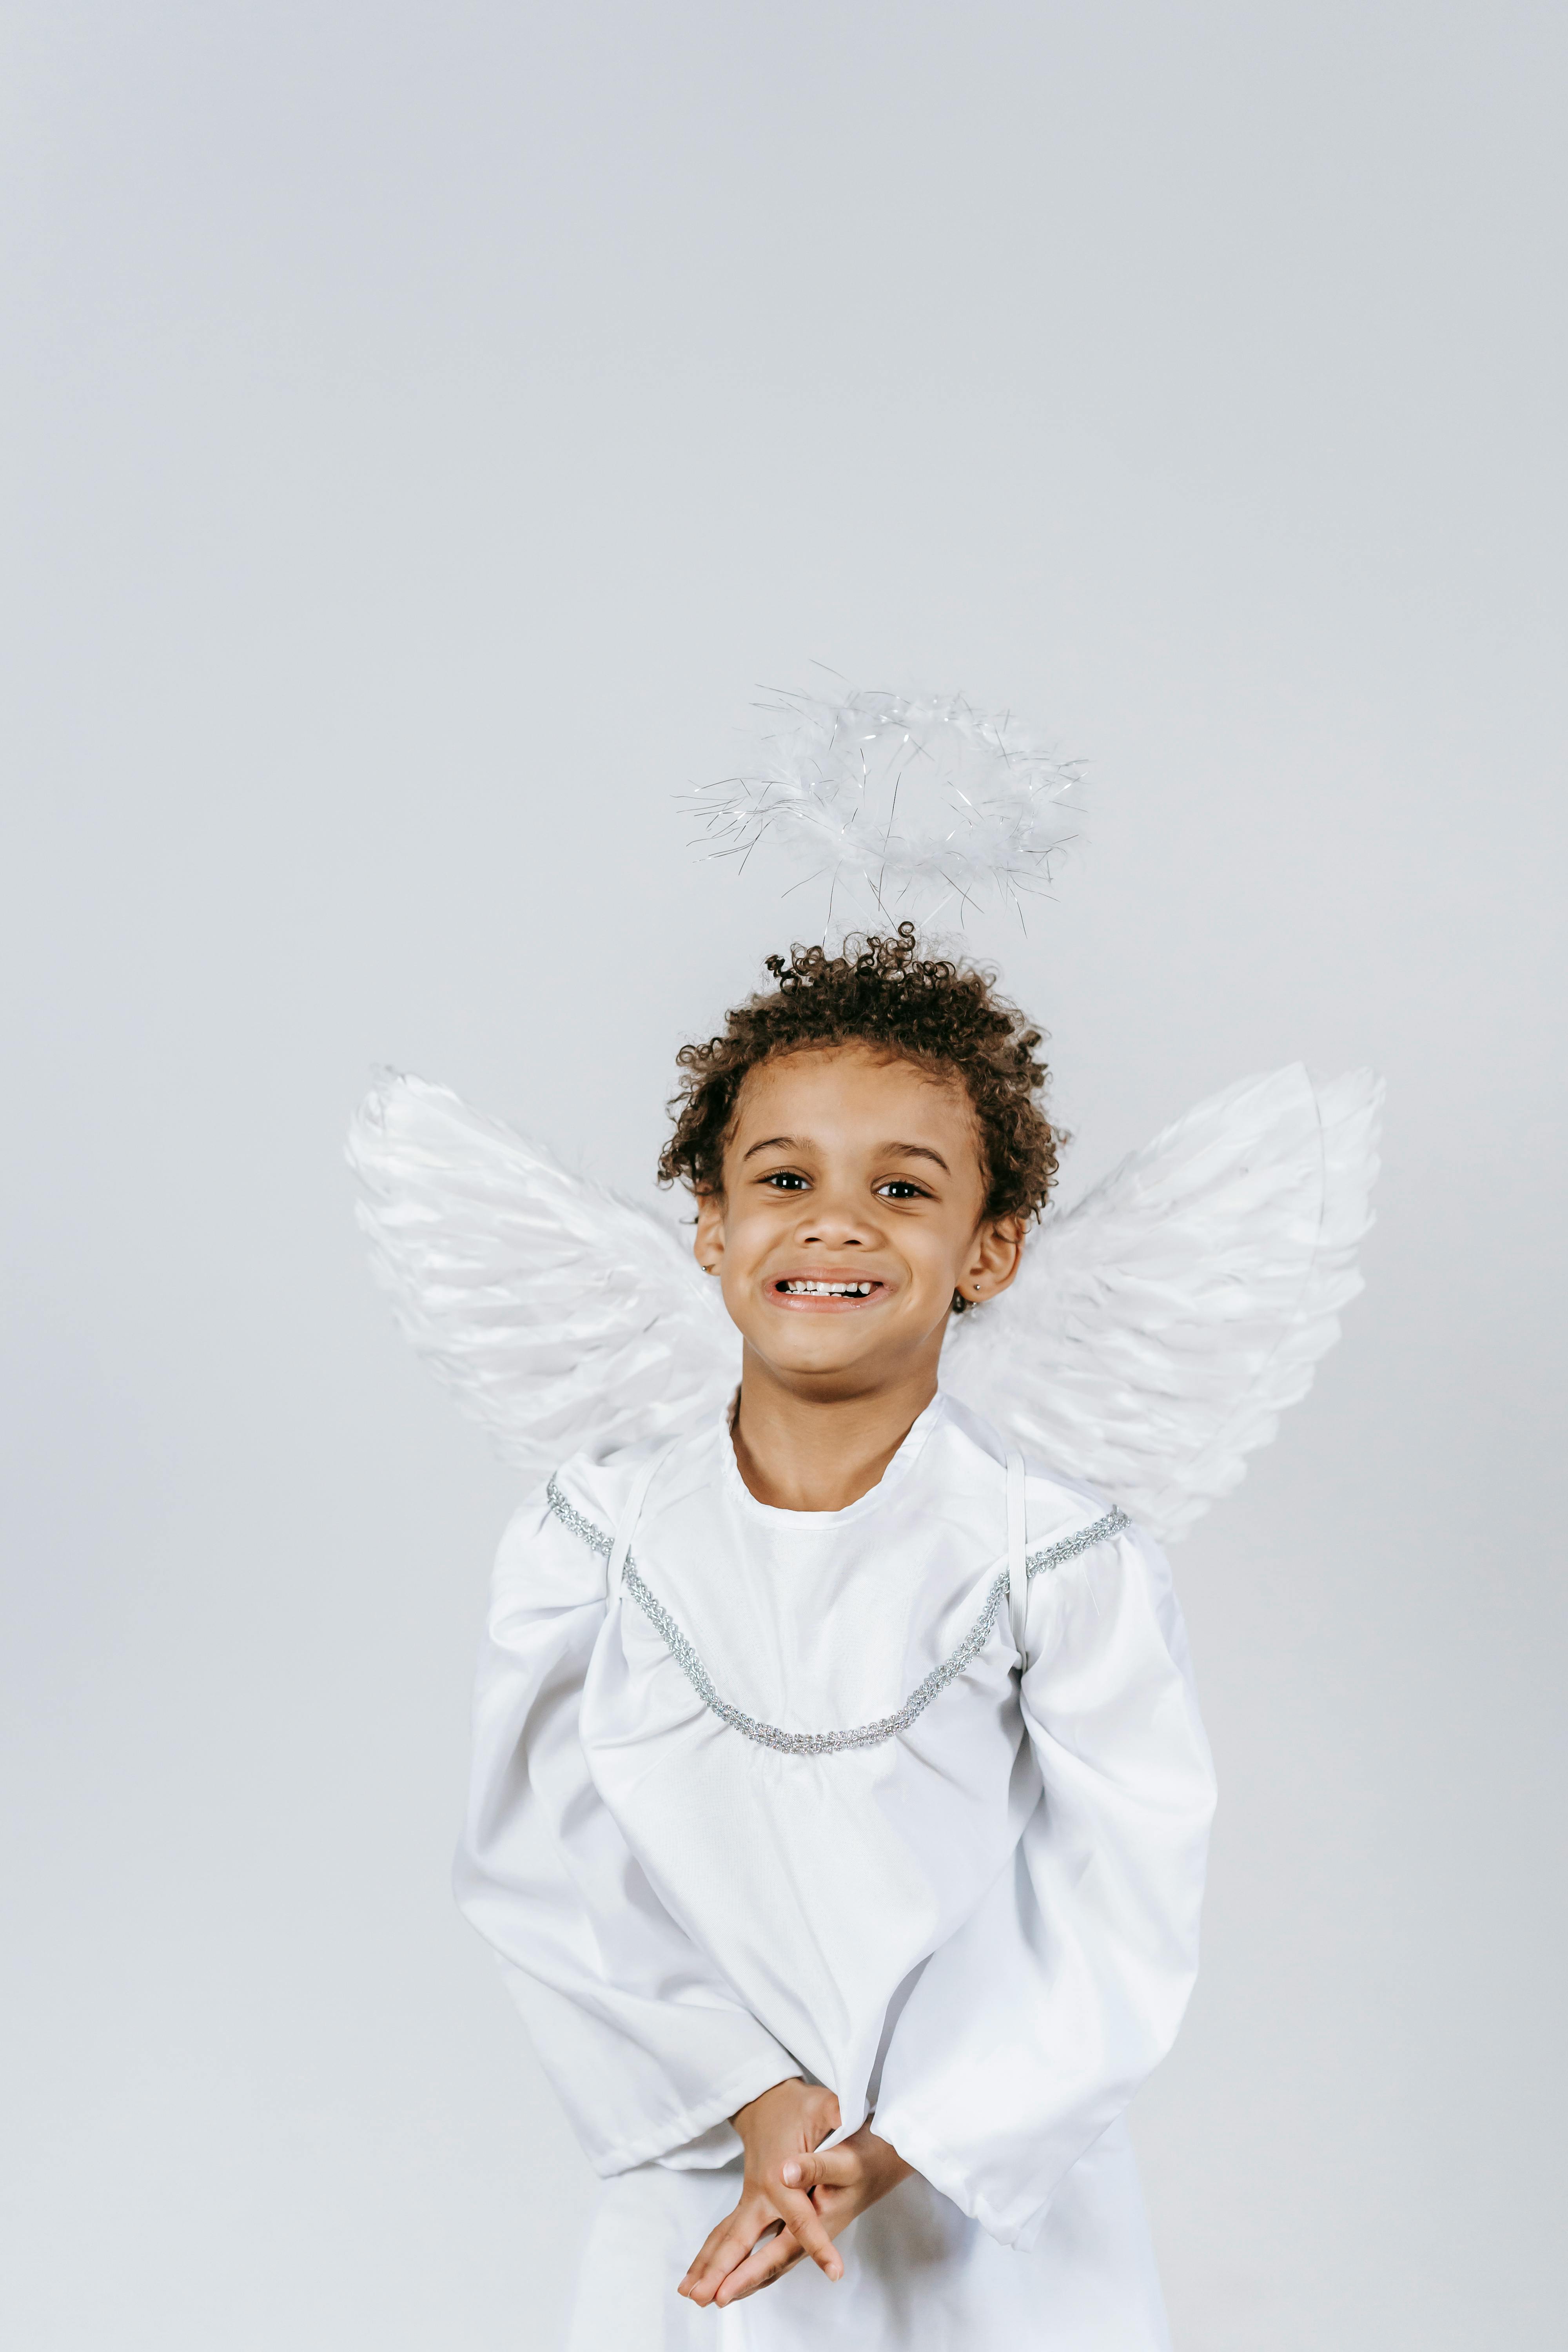 Cute black boy in angel outfit in studio during holiday · Free Stock Photo